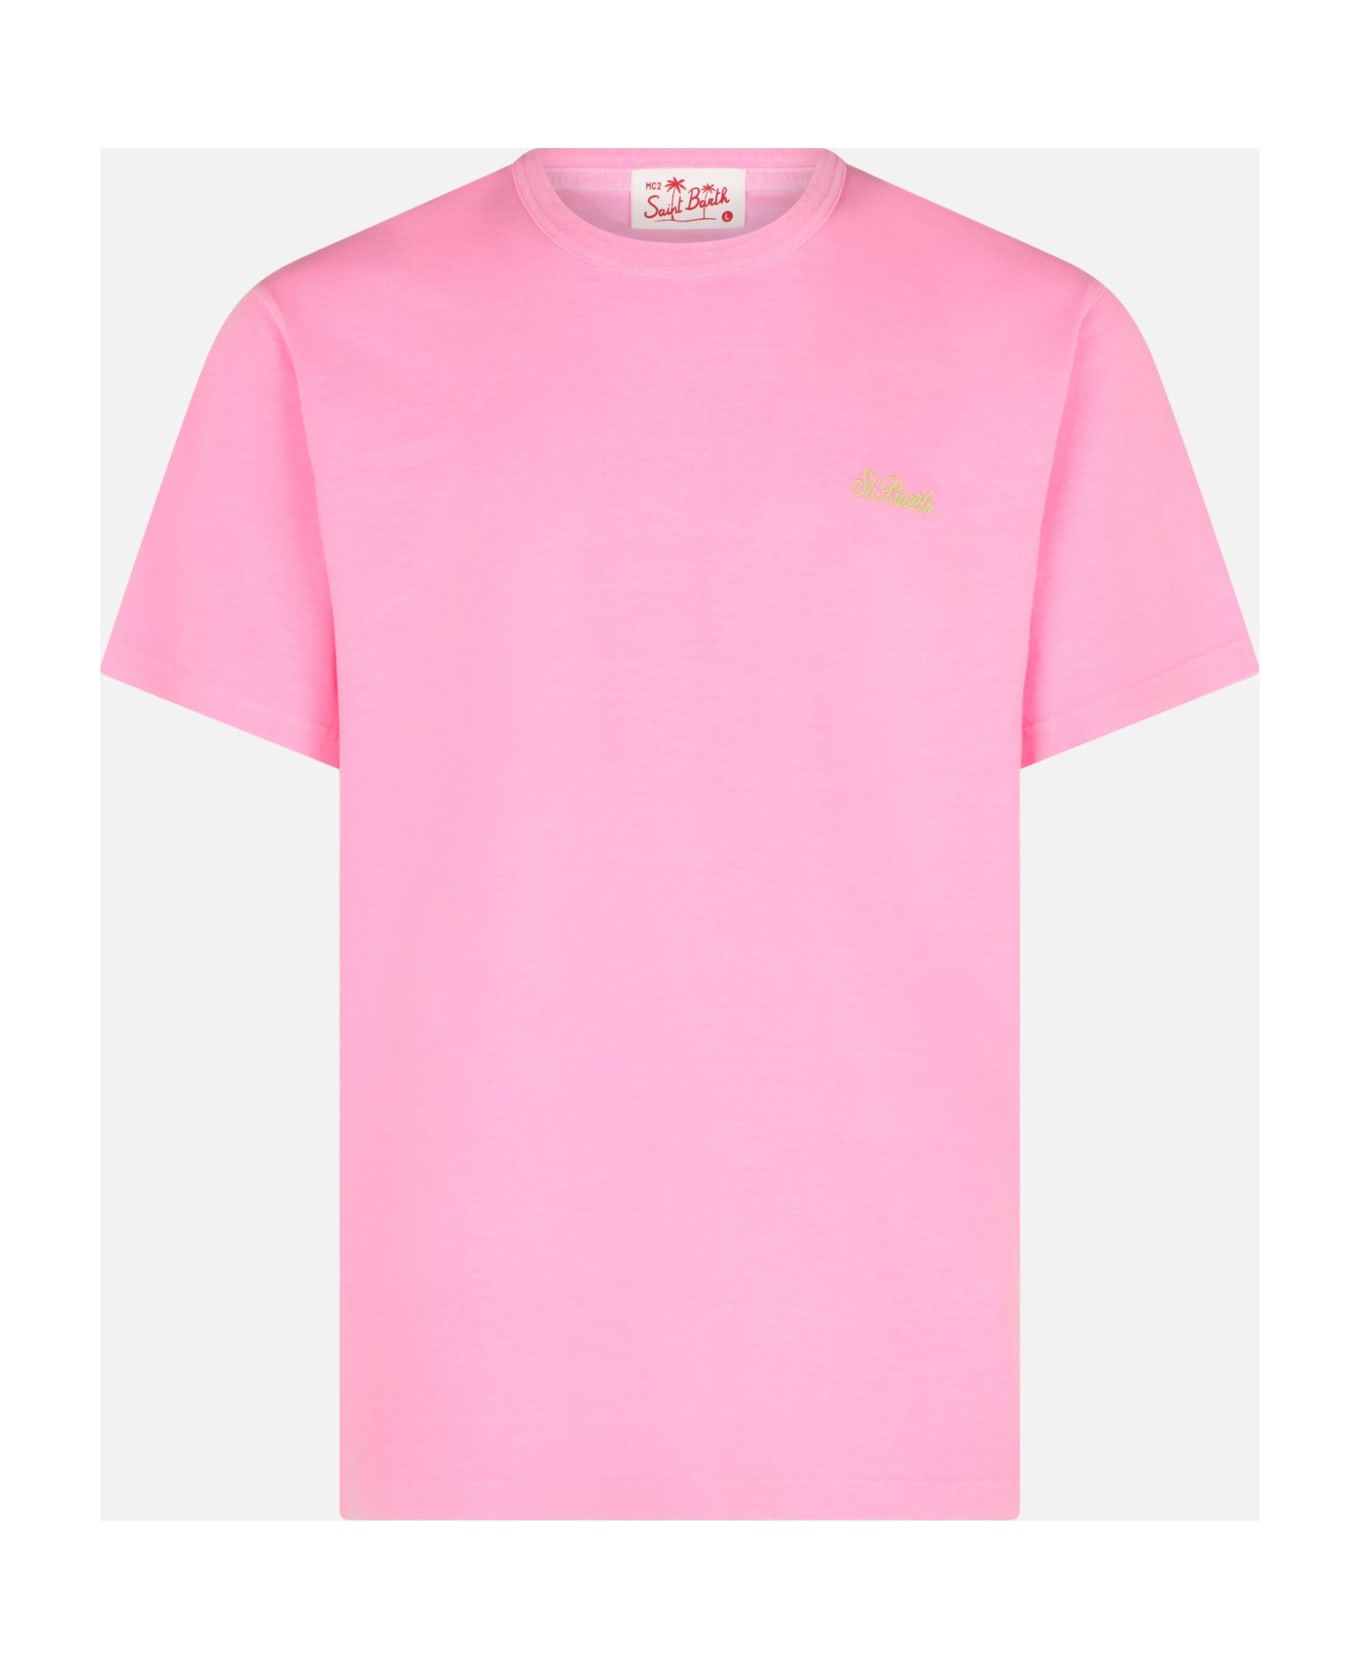 MC2 Saint Barth Man Pink Cotton T-shirt With St. Barth Embroidery - FLUO